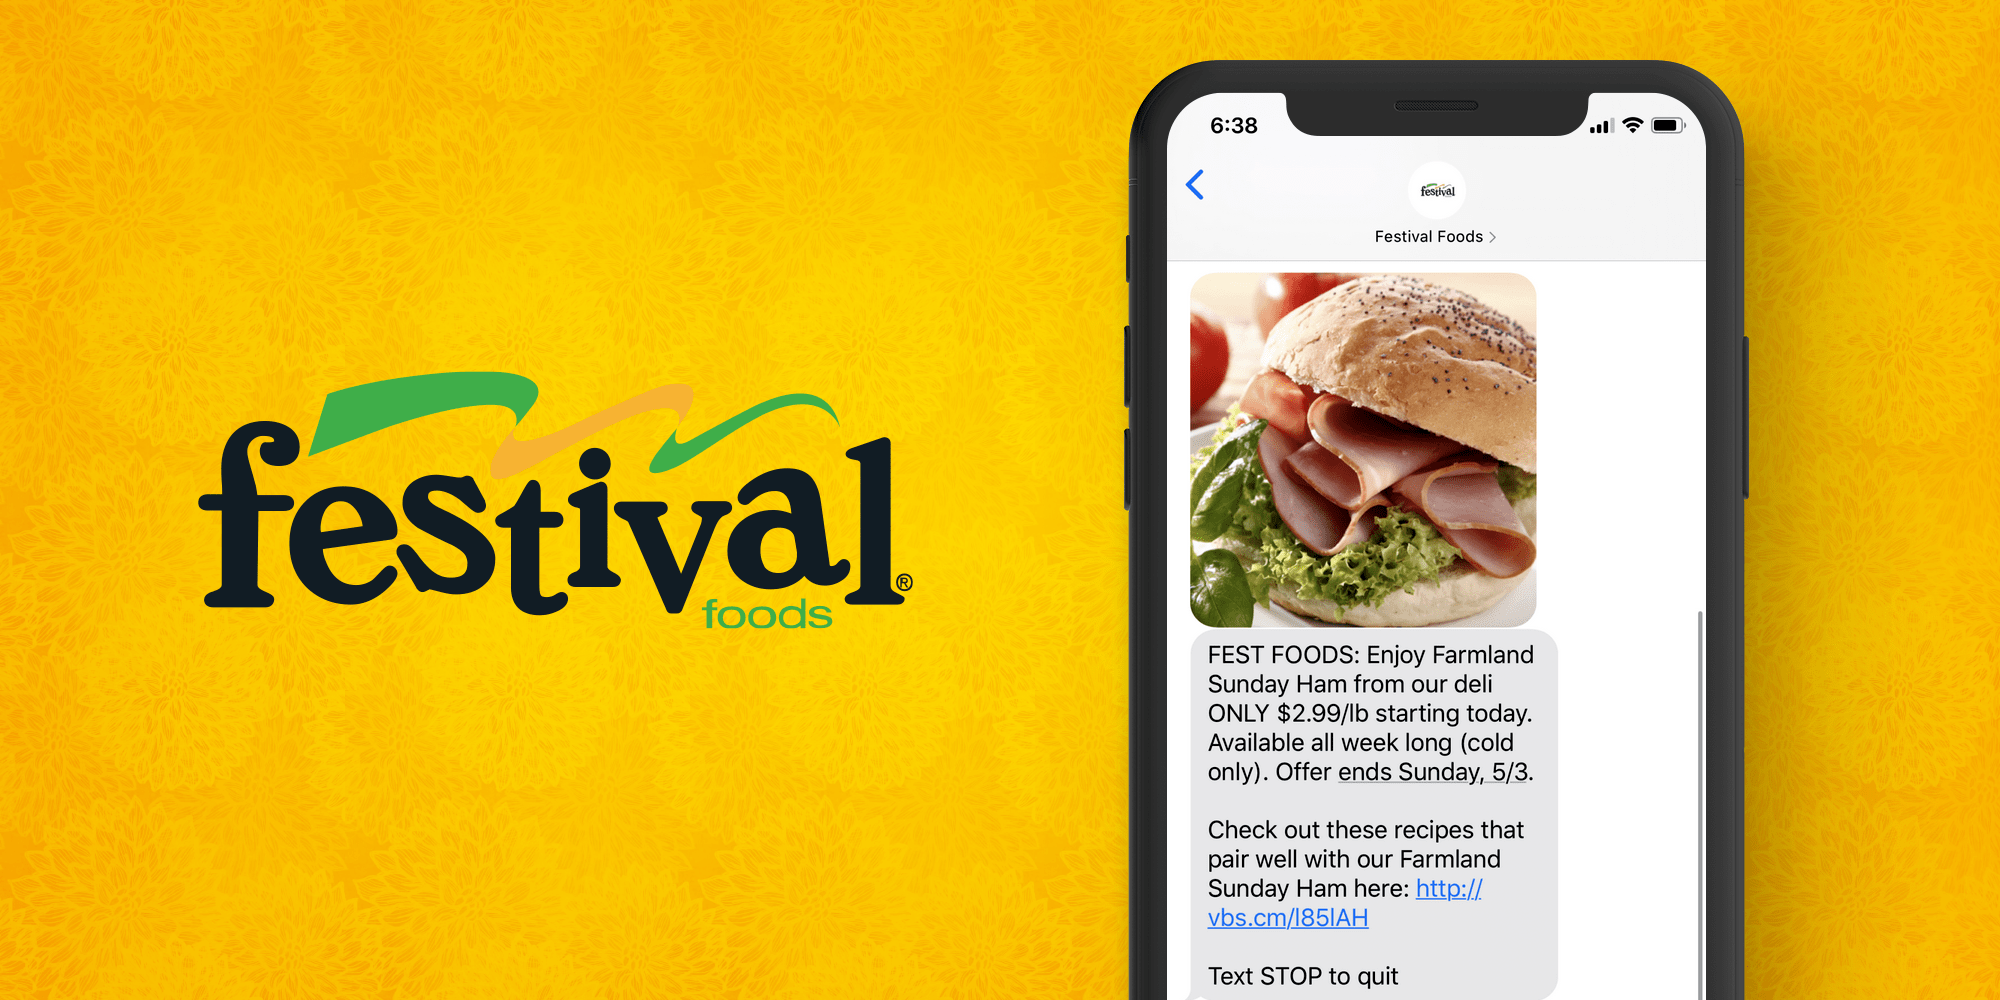 Festival Foods SMS Marketing Example - 50 Examples of Brands Using SMS Marketing